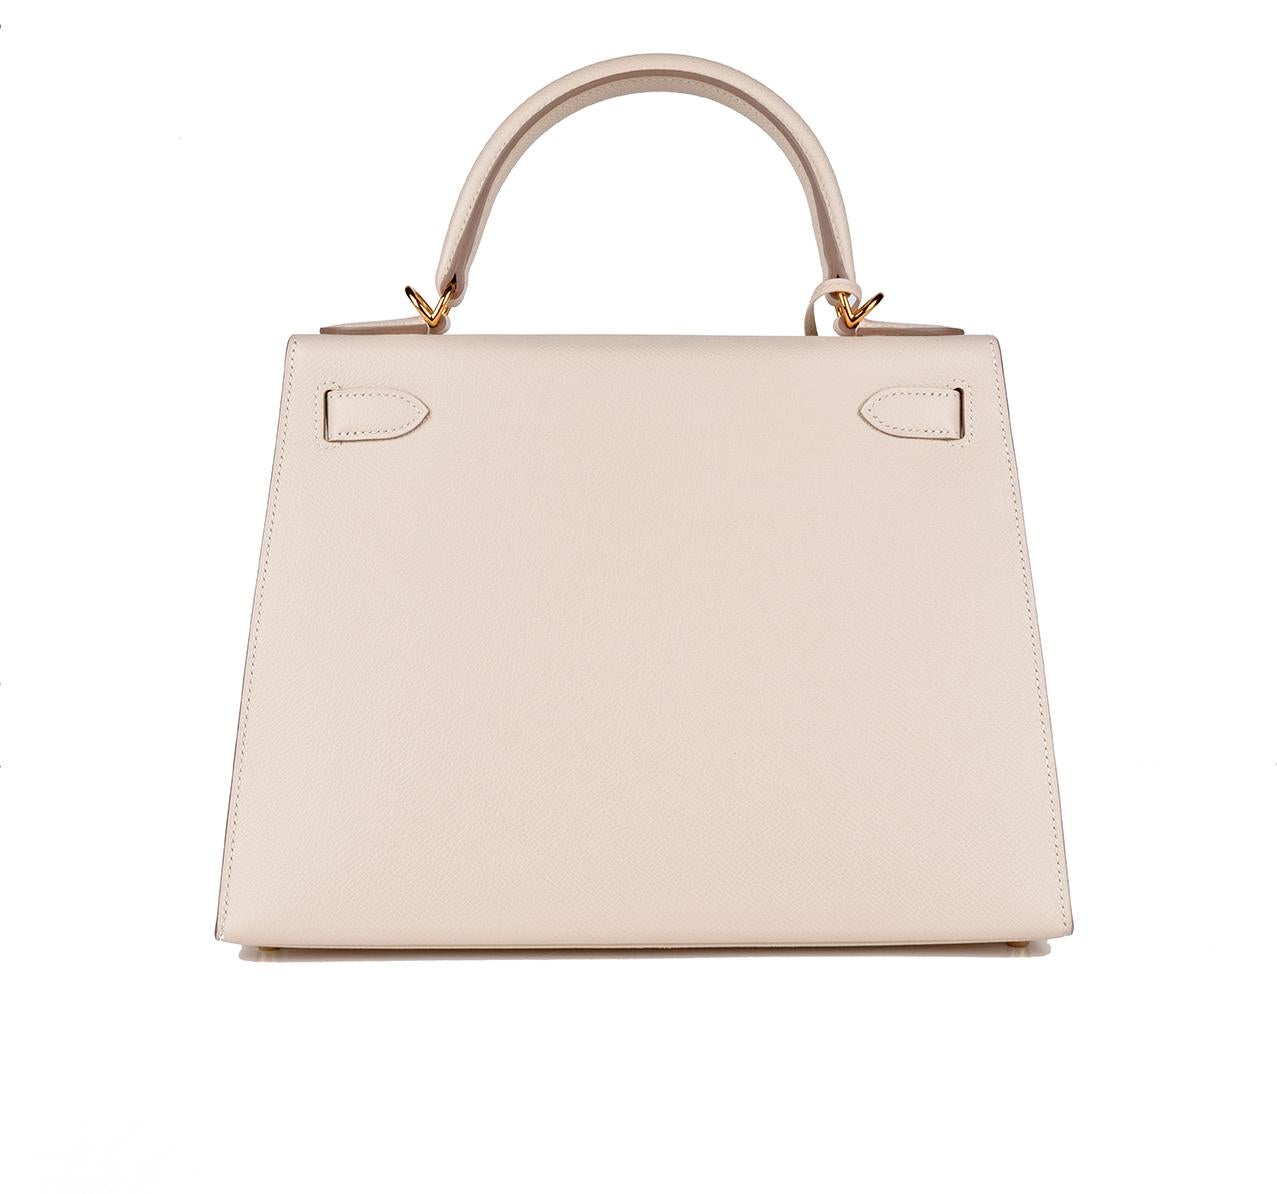 Hermes 28cm Kelly
Hermes Kelly 28cm

Neutral color  Craie, a creamy off white
Epsom sellier 
The combination of Craie and Gold is absolutely stunning

Gold Hardware

Perfect neutral color
Bag is in excellent condition
Slight scratches at the feet